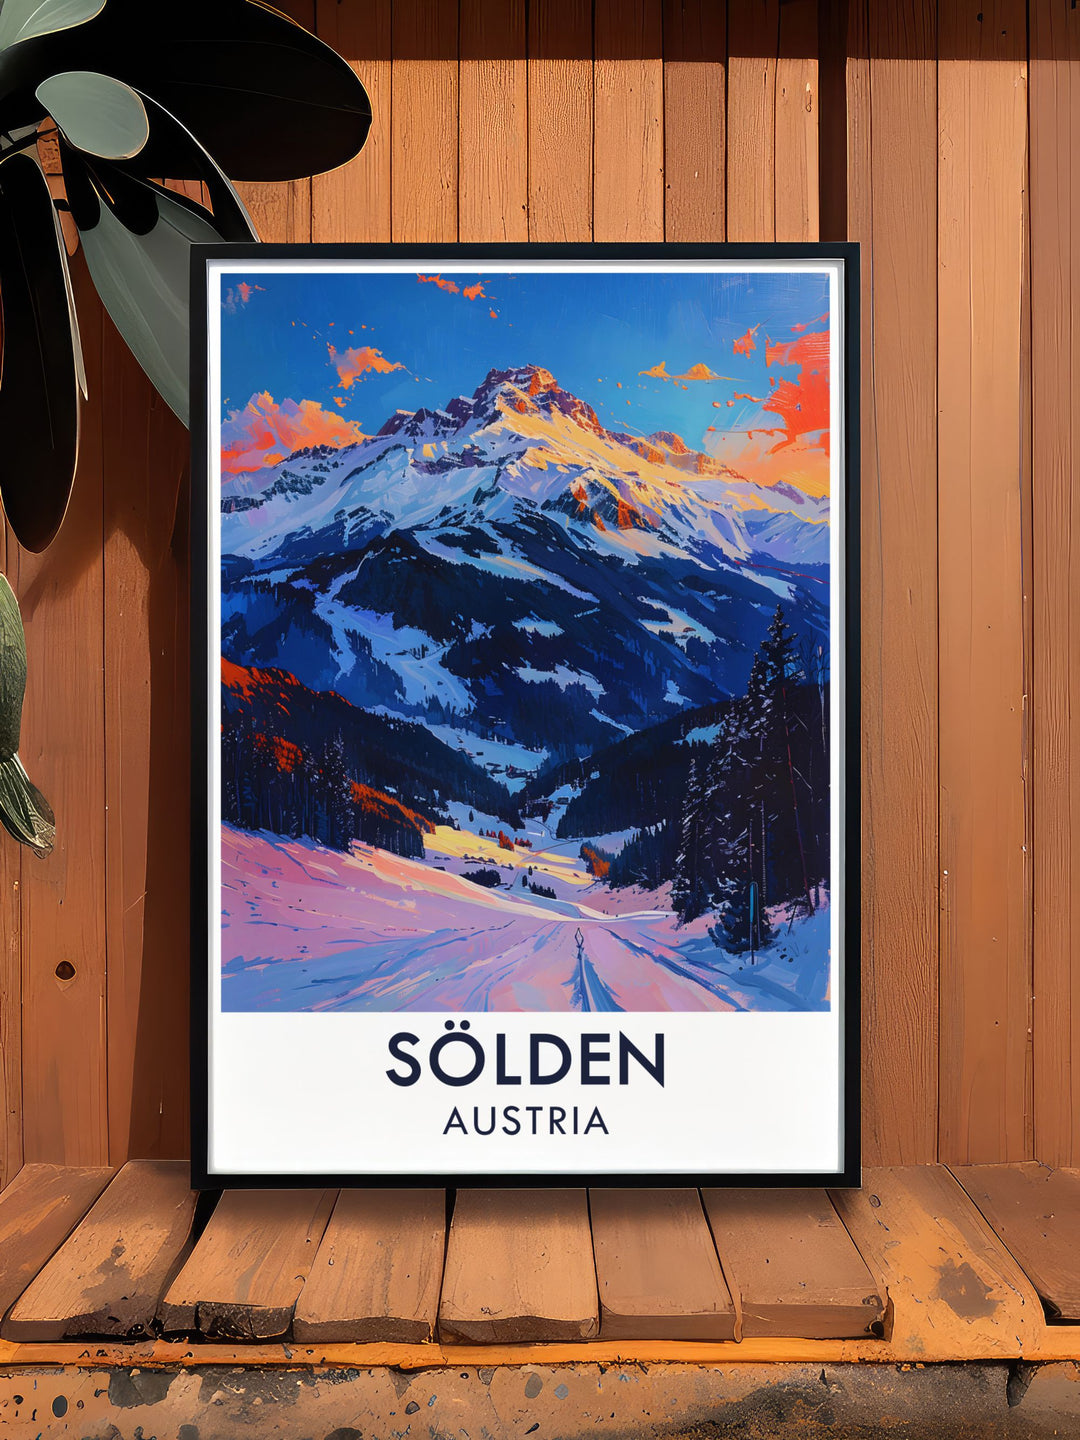 This travel poster showcases the majestic Gaislachkogl Peak in Solden, offering a stunning perspective of the snow covered Alps and serene natural beauty, ideal for those who appreciate high altitude adventures.